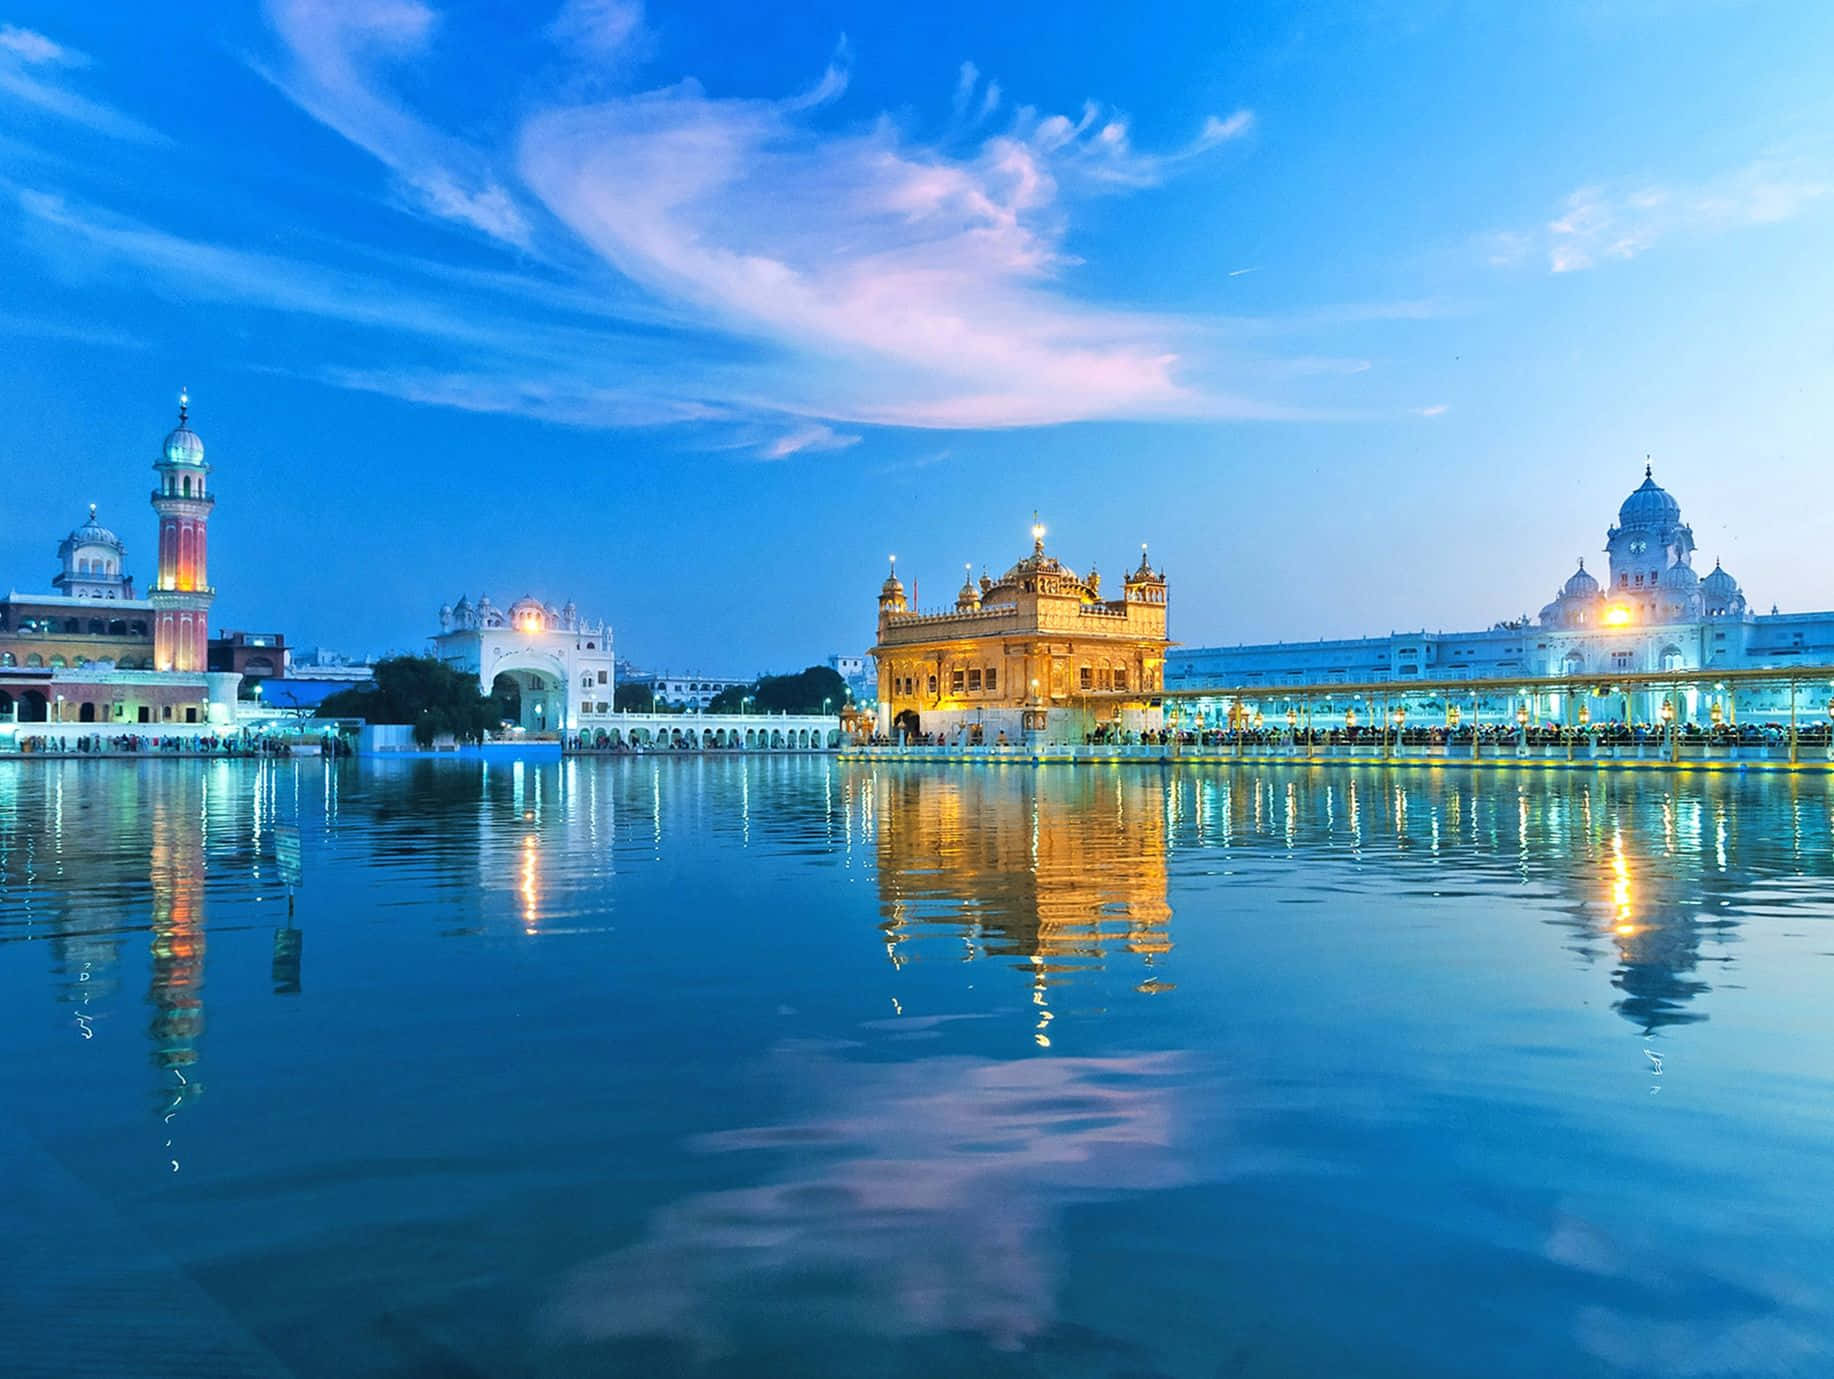 Majestic Golden Temple in Amritsar reflecting on the serene waters of the holy pond